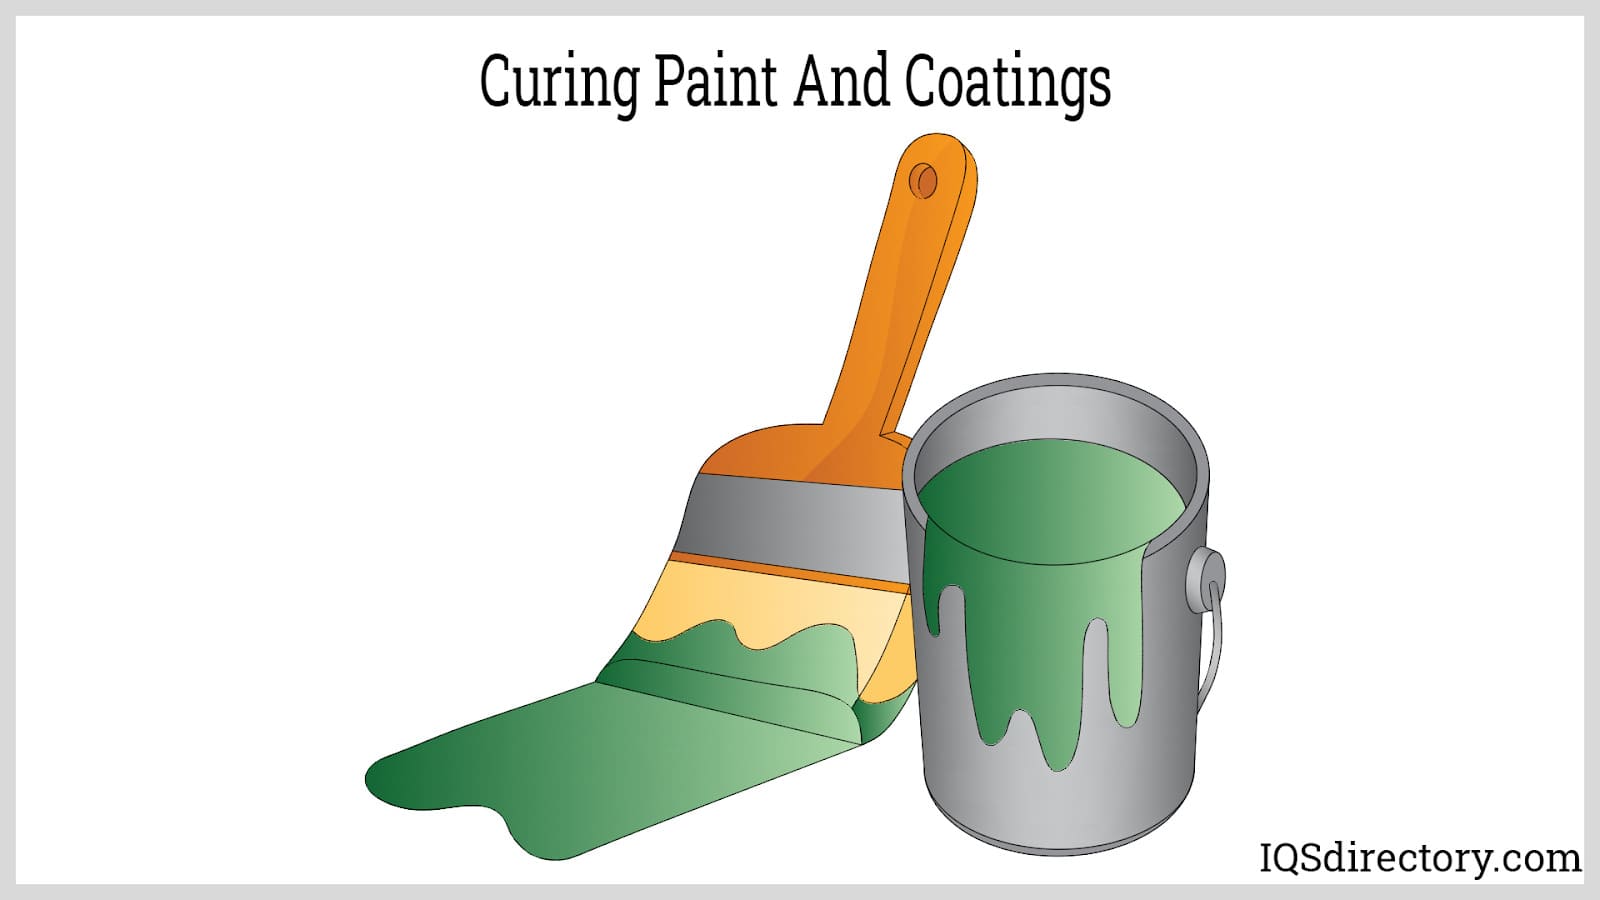 Curing Paint And Coatings